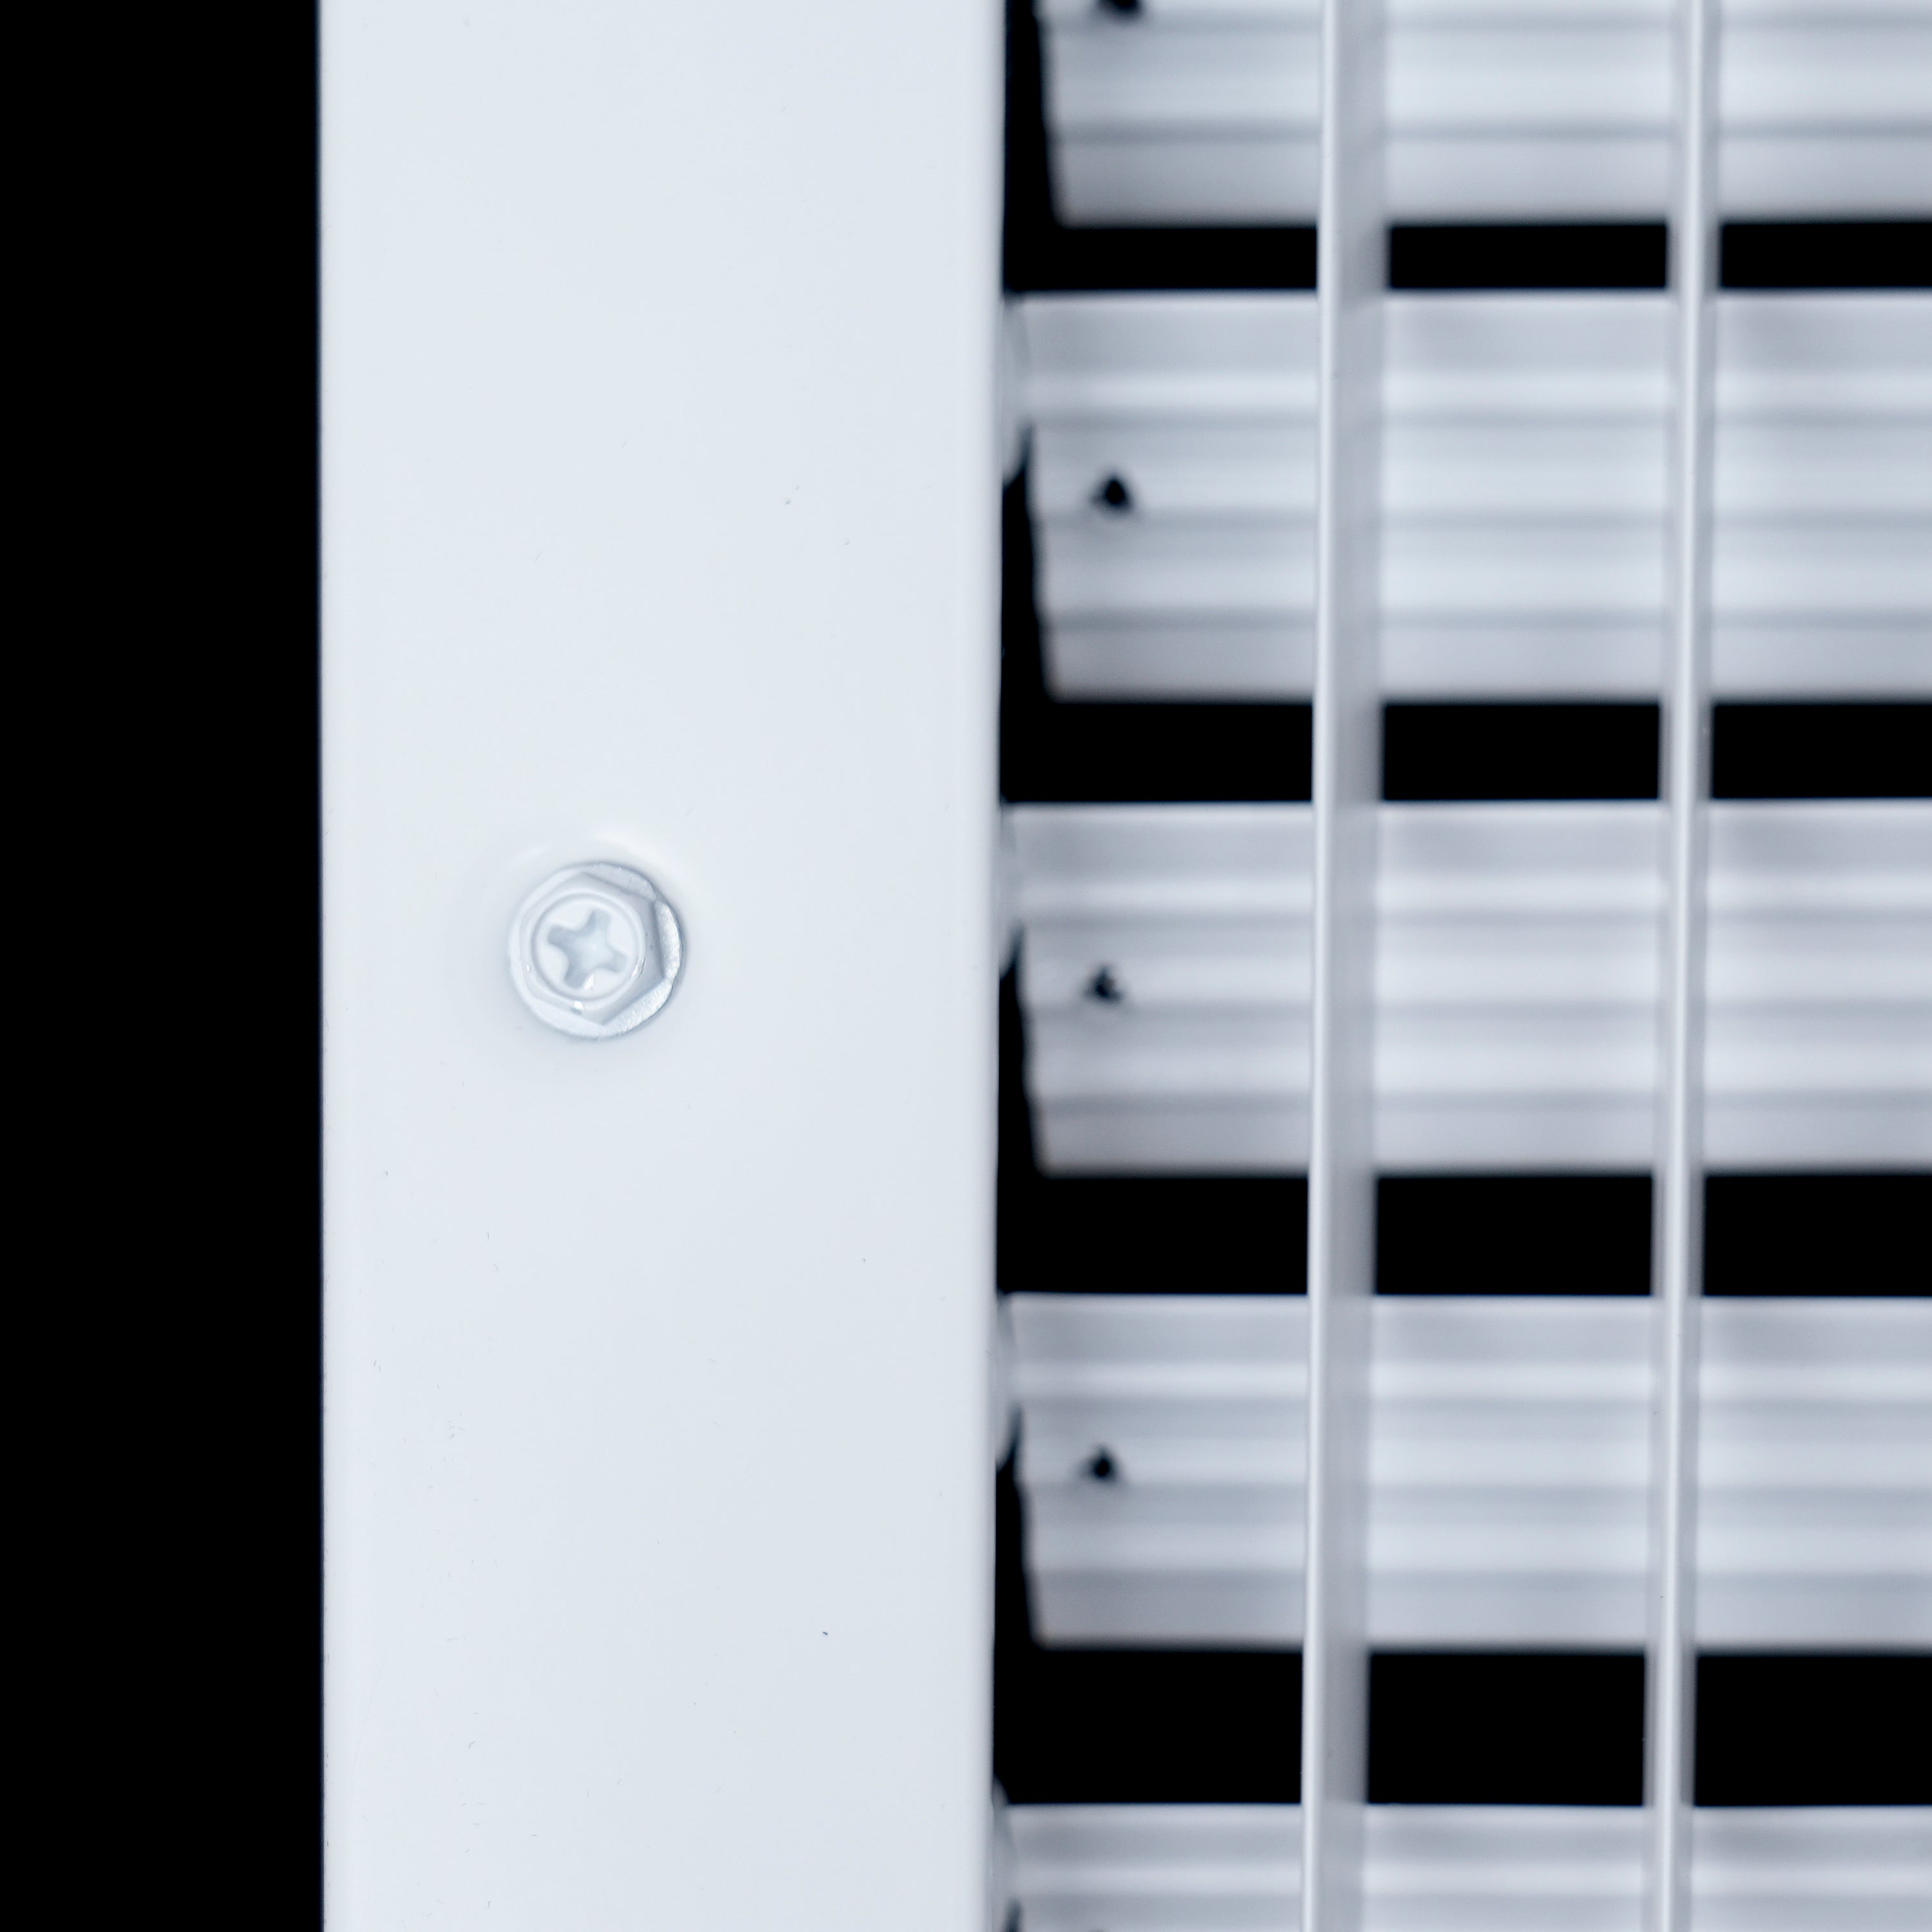 12"W x 8"H  Steel Adjustable Air Supply Grille | Register Vent Cover Grill for Sidewall and Ceiling | White | Outer Dimensions: 13.75"W X 9.75"H for 12x8 Duct Opening